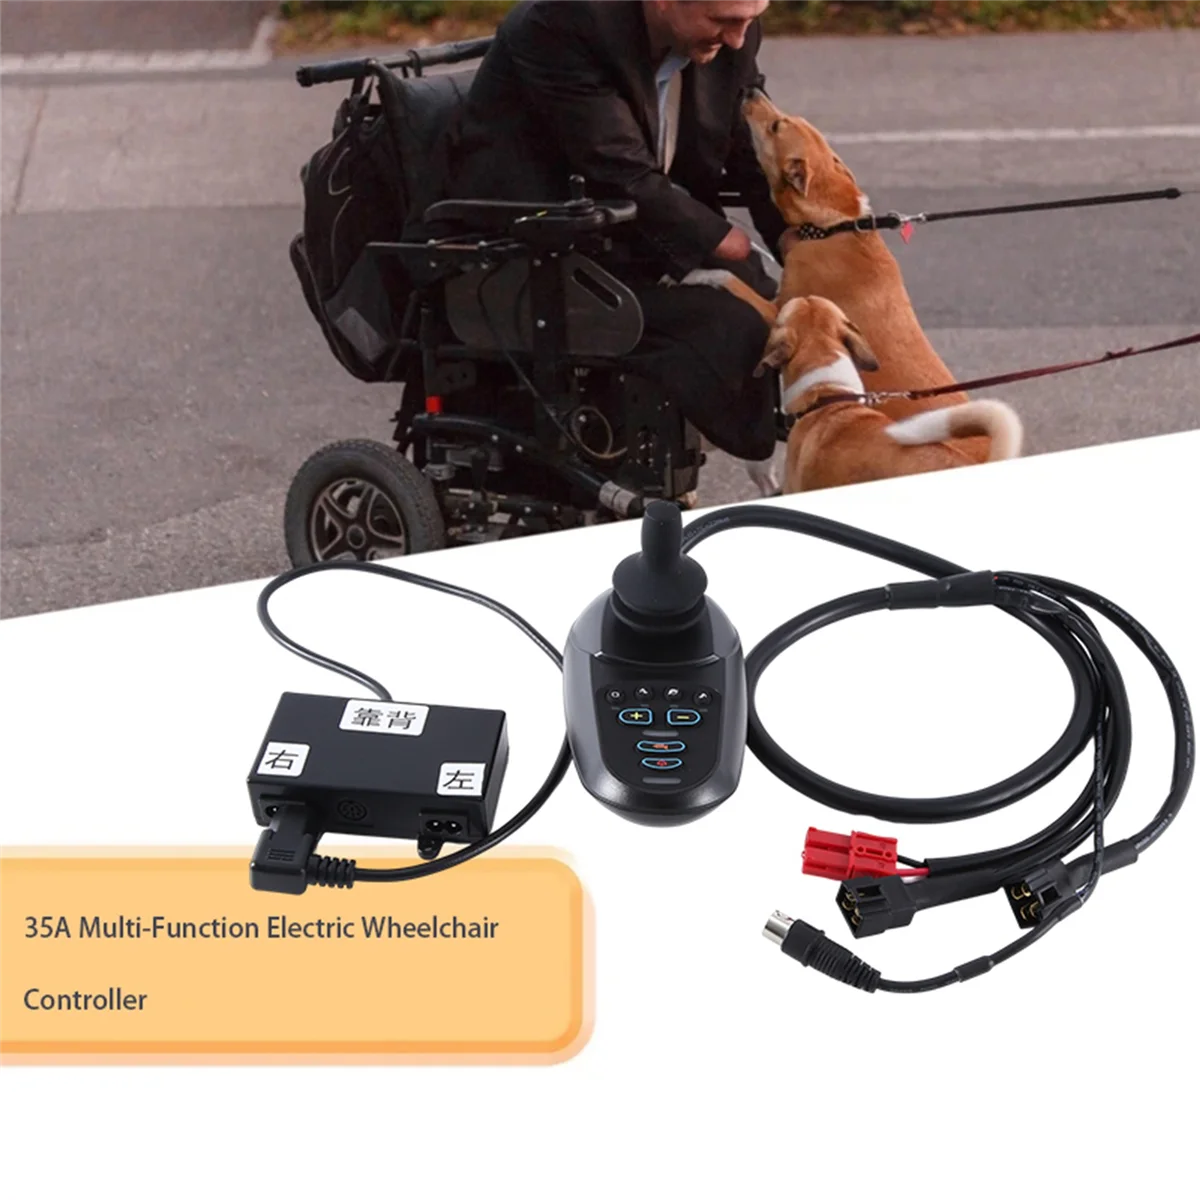 

35A Multi-Function Electric Wheelchair Controller Common Connector Can Bluetooth Remote Control